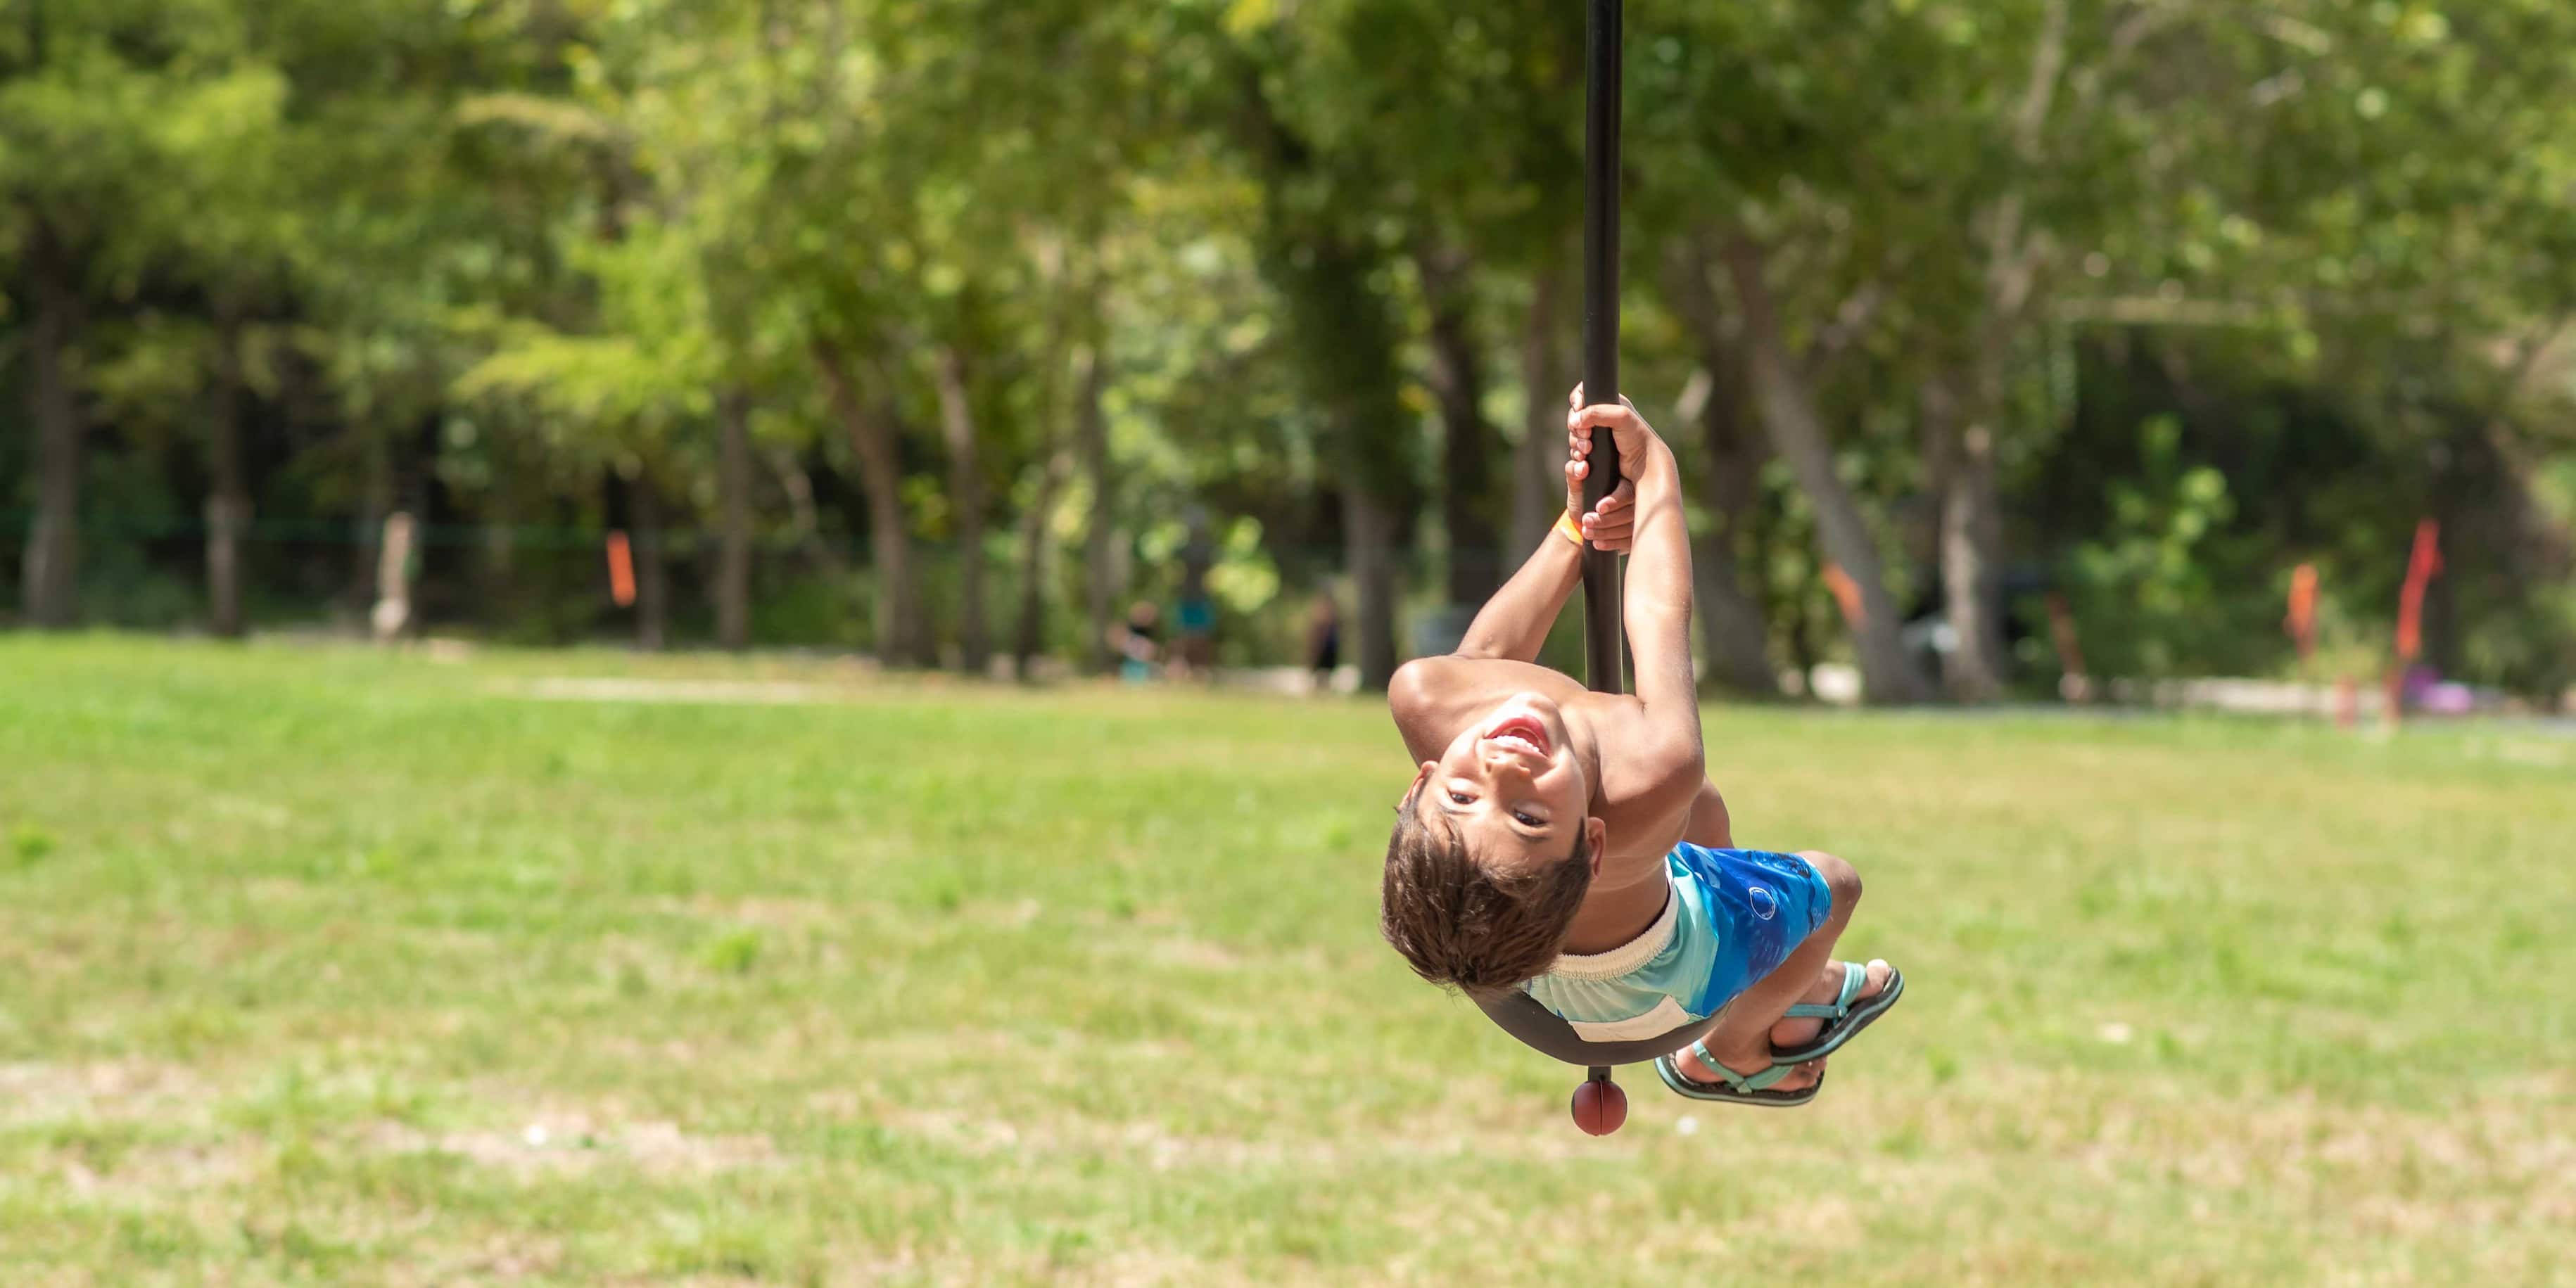 A smiling young child riding the playground zipline at Camp Fimfo Texas Hill Country